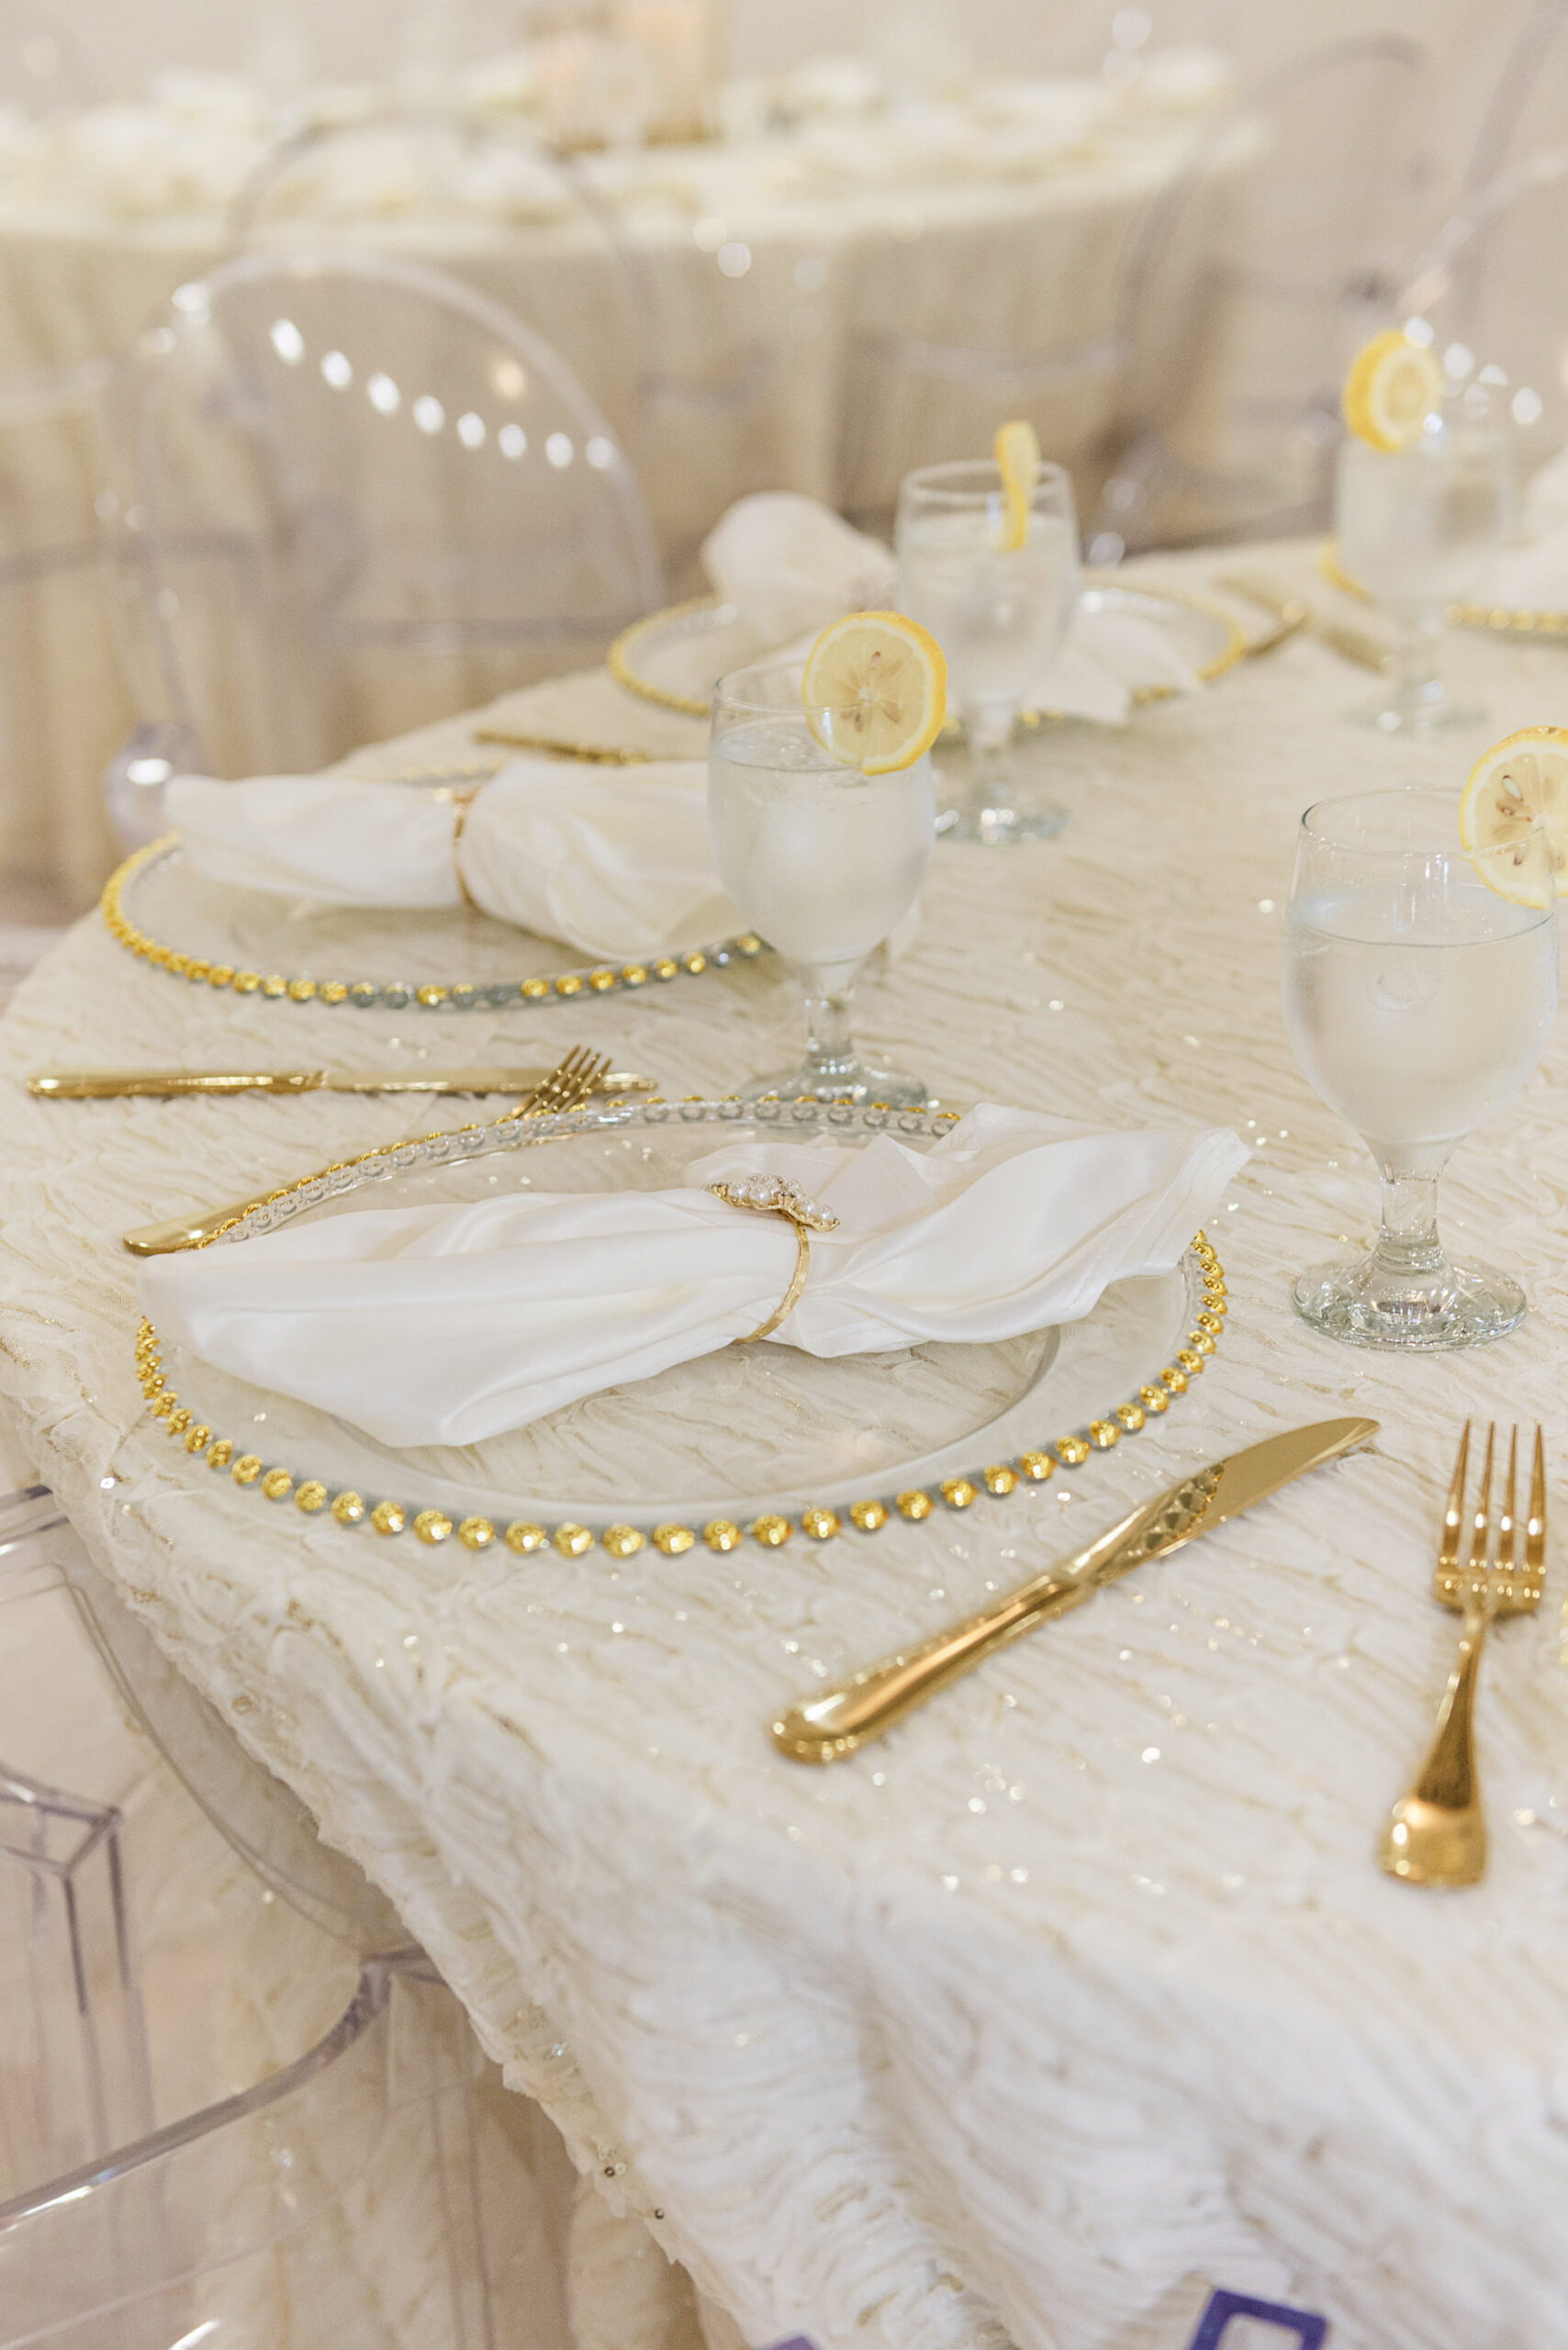 White and Gold Wedding Reception Ideas | Gold Beveled Glass Chargers and Geometric Votives | Pearl Napkin Rings | Tampa Bay Outside the Box Rentals